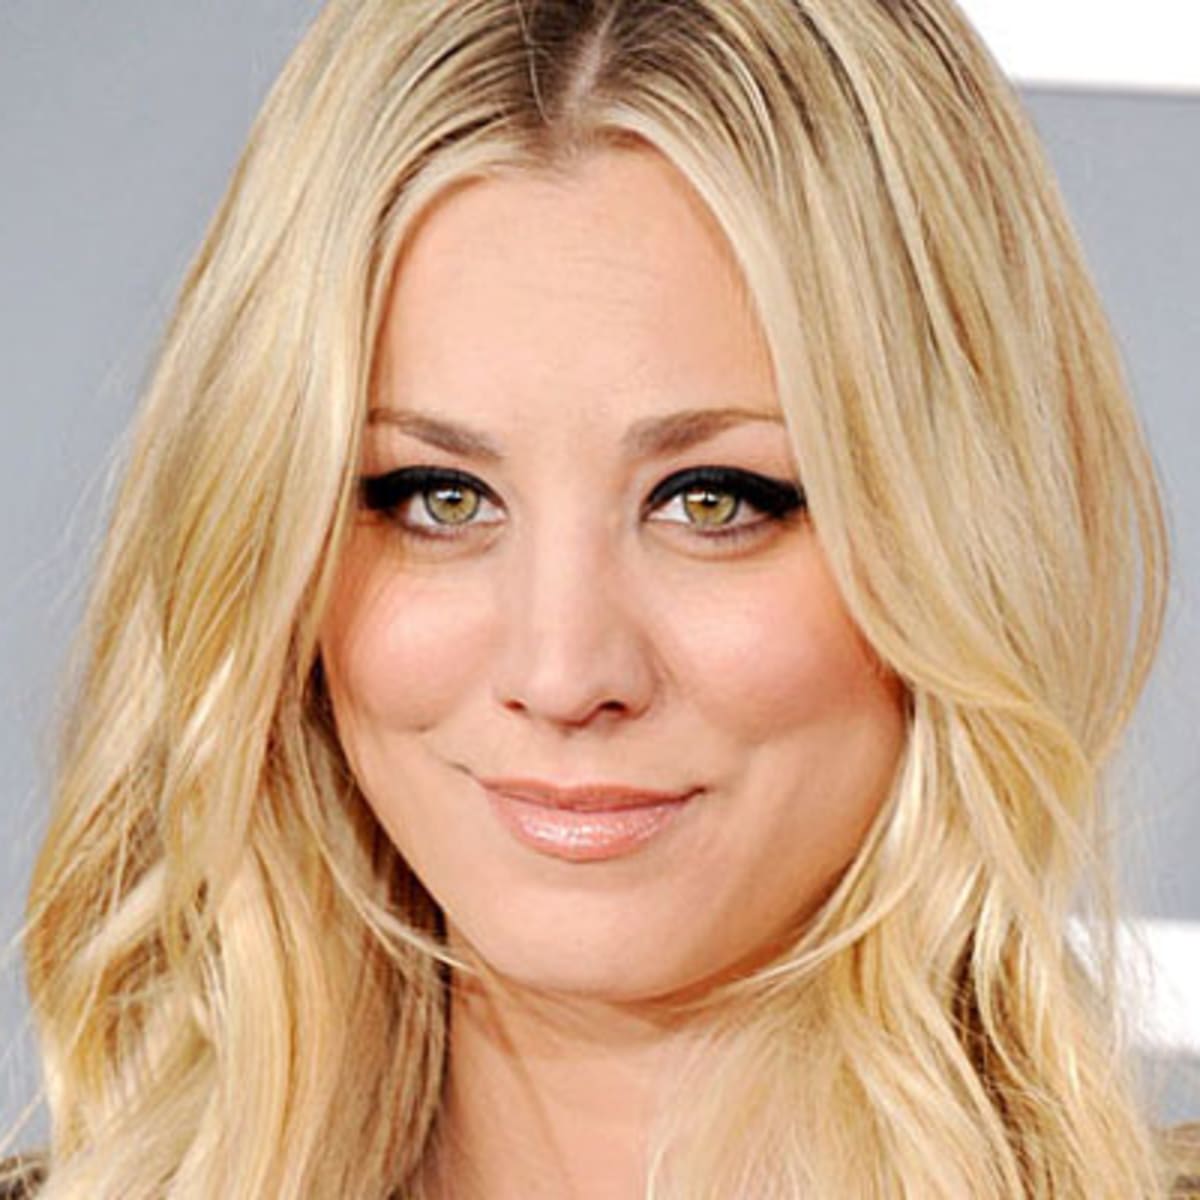 Kaley Cuoco - What Happens When Women Like Kaley Cuoco-Sweeting Say They Don't Need  Feminism? - Verily